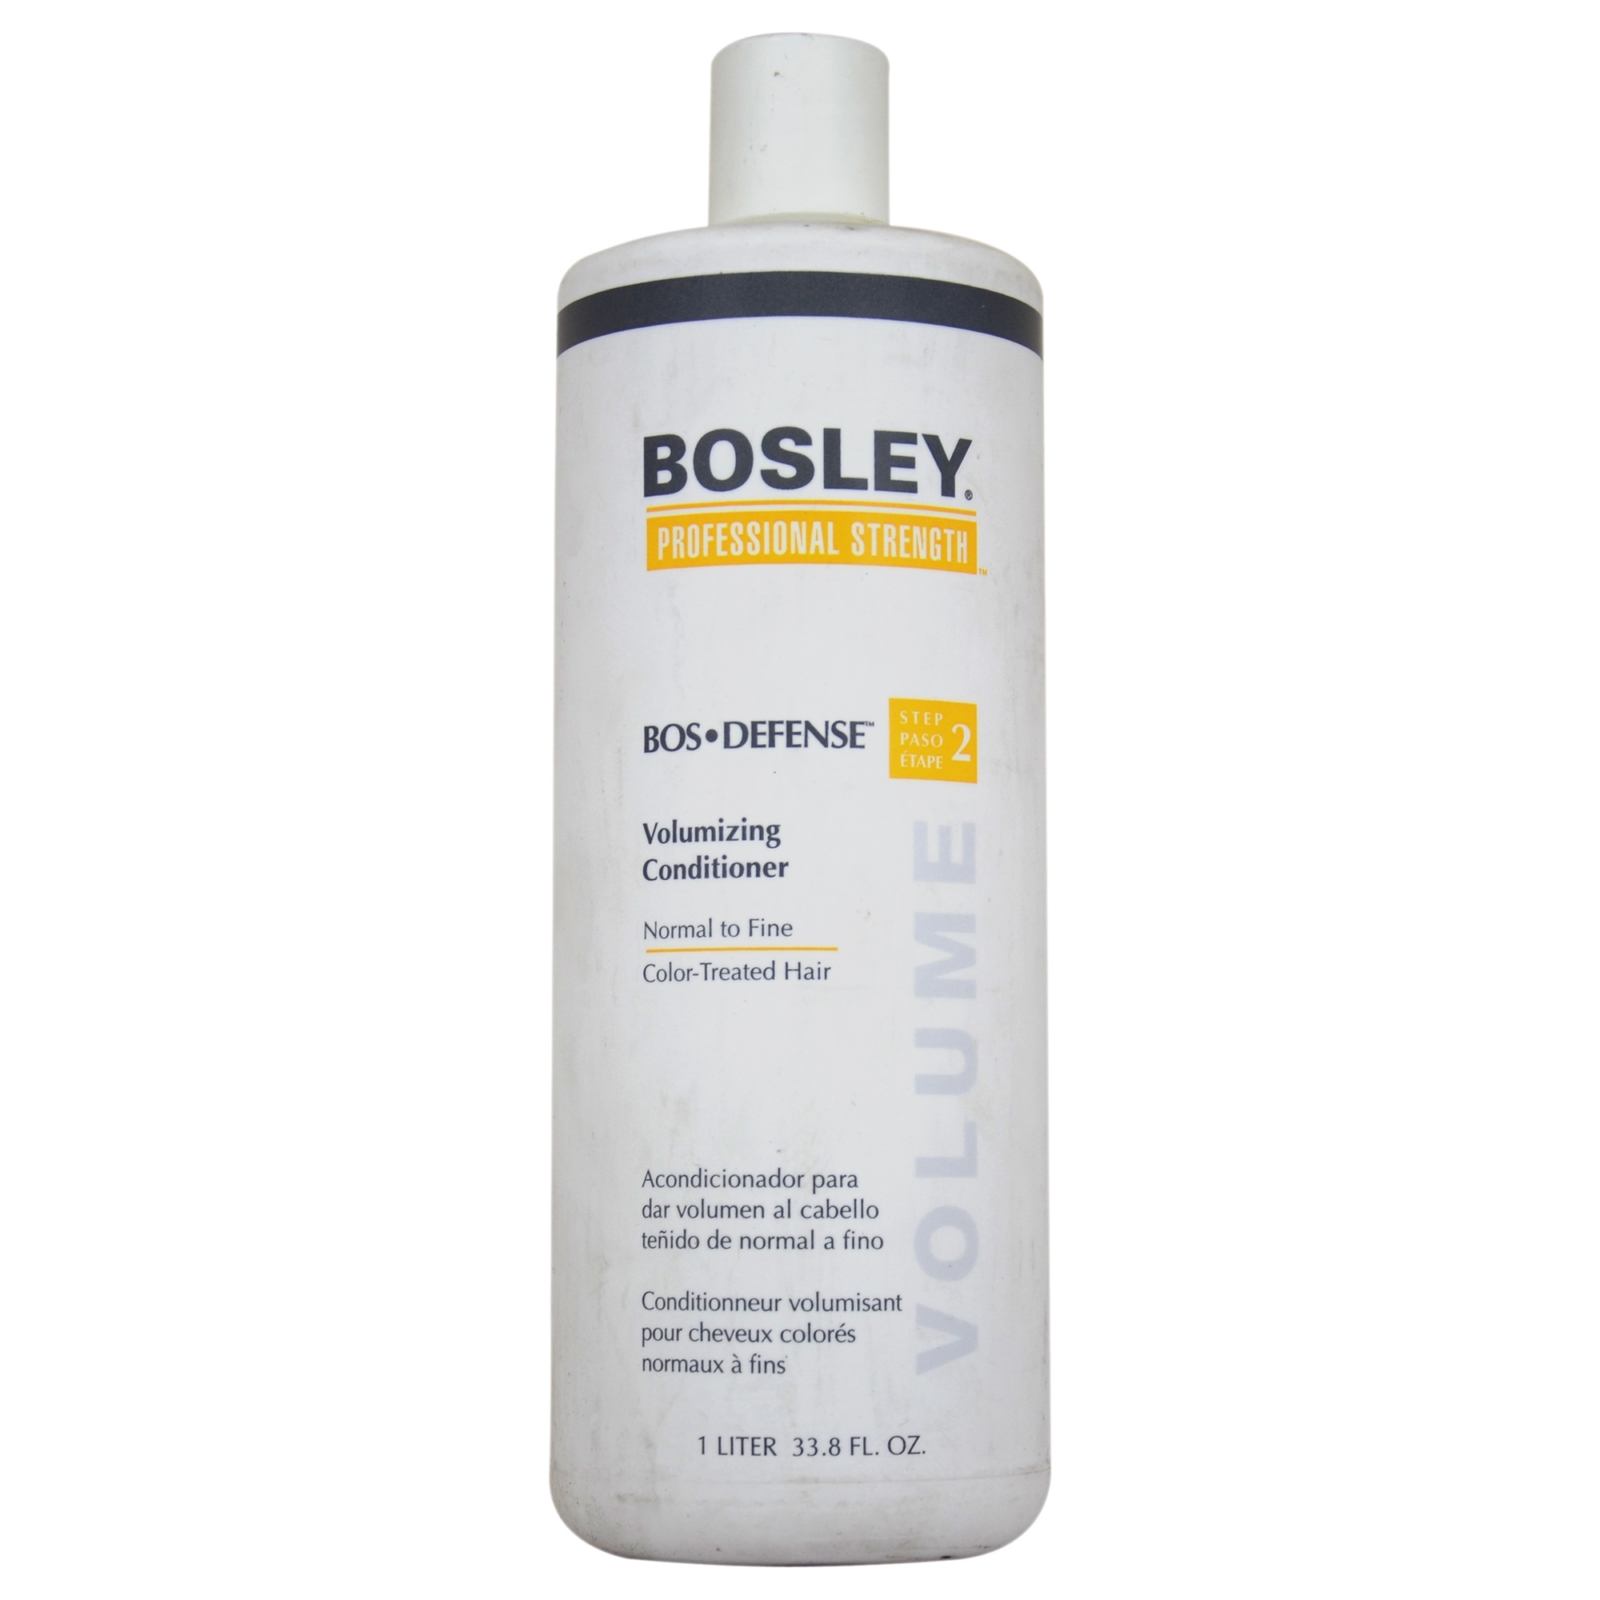 BOSLEY Bos-Defense Volumizing Conditioner for Normal To Fine Color-Treated Hair by  for Unisex - 33.8 oz Conditioner